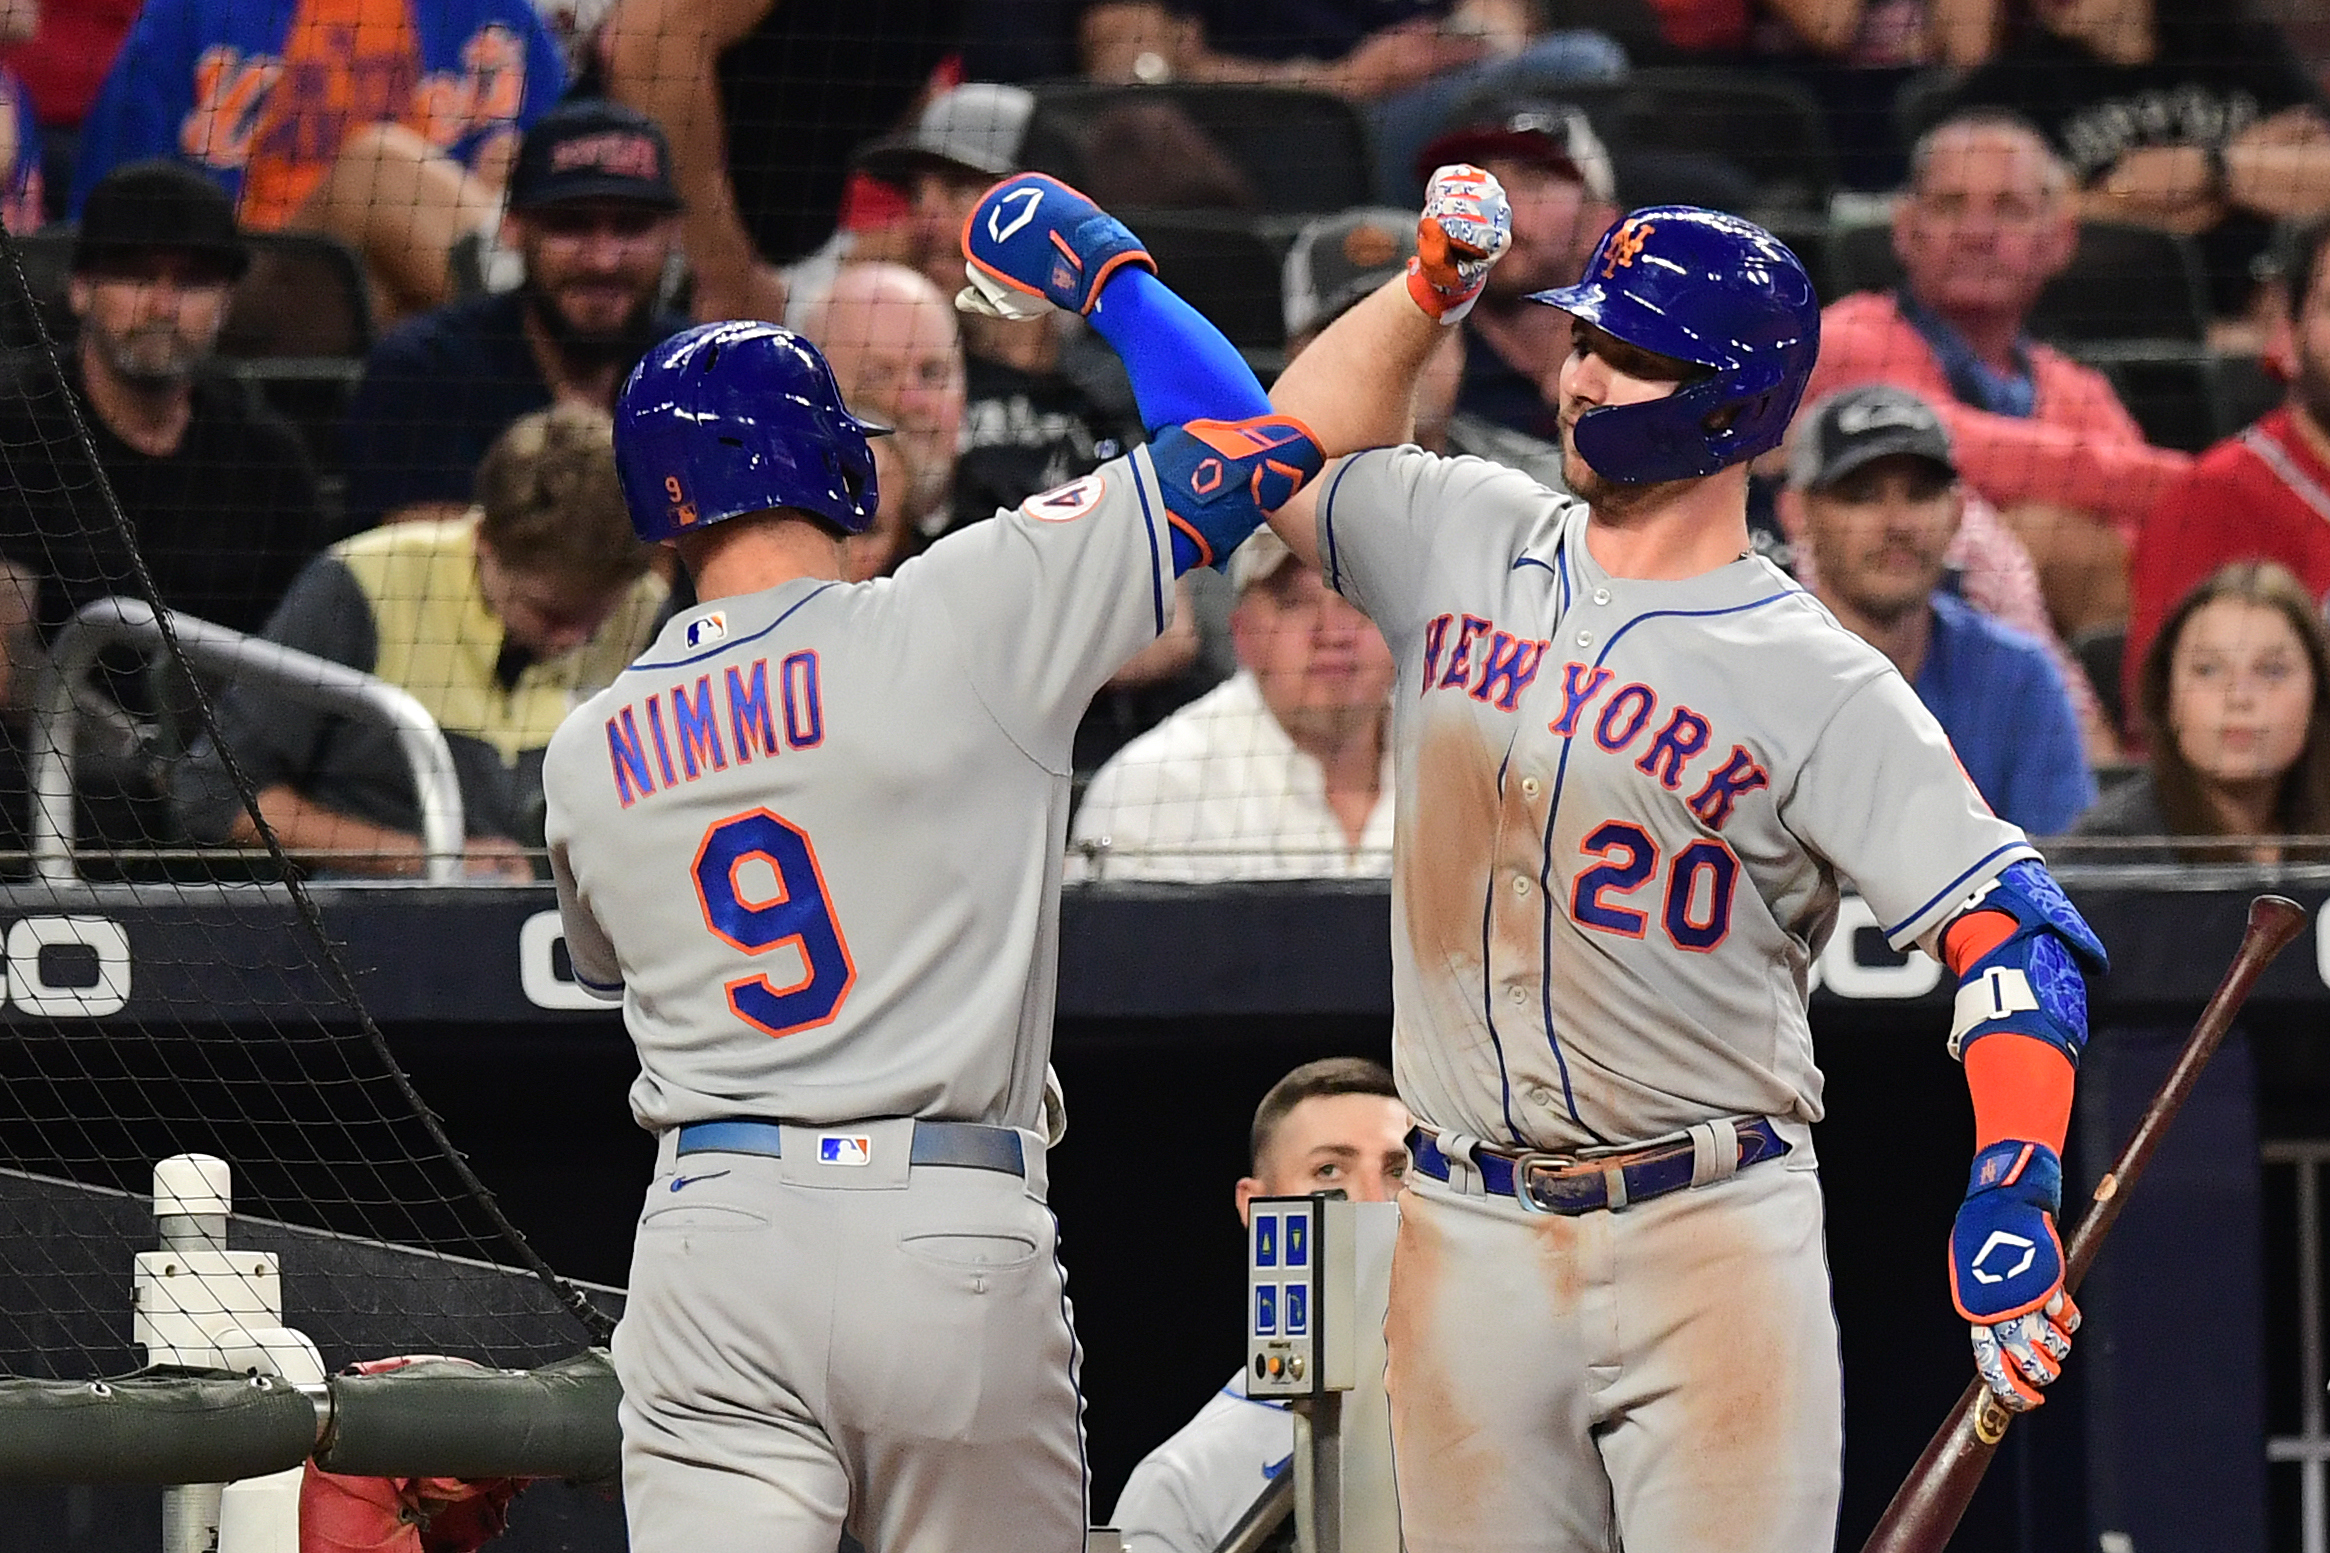 Focused Mets slugger Pete Alonso is locked in this spring